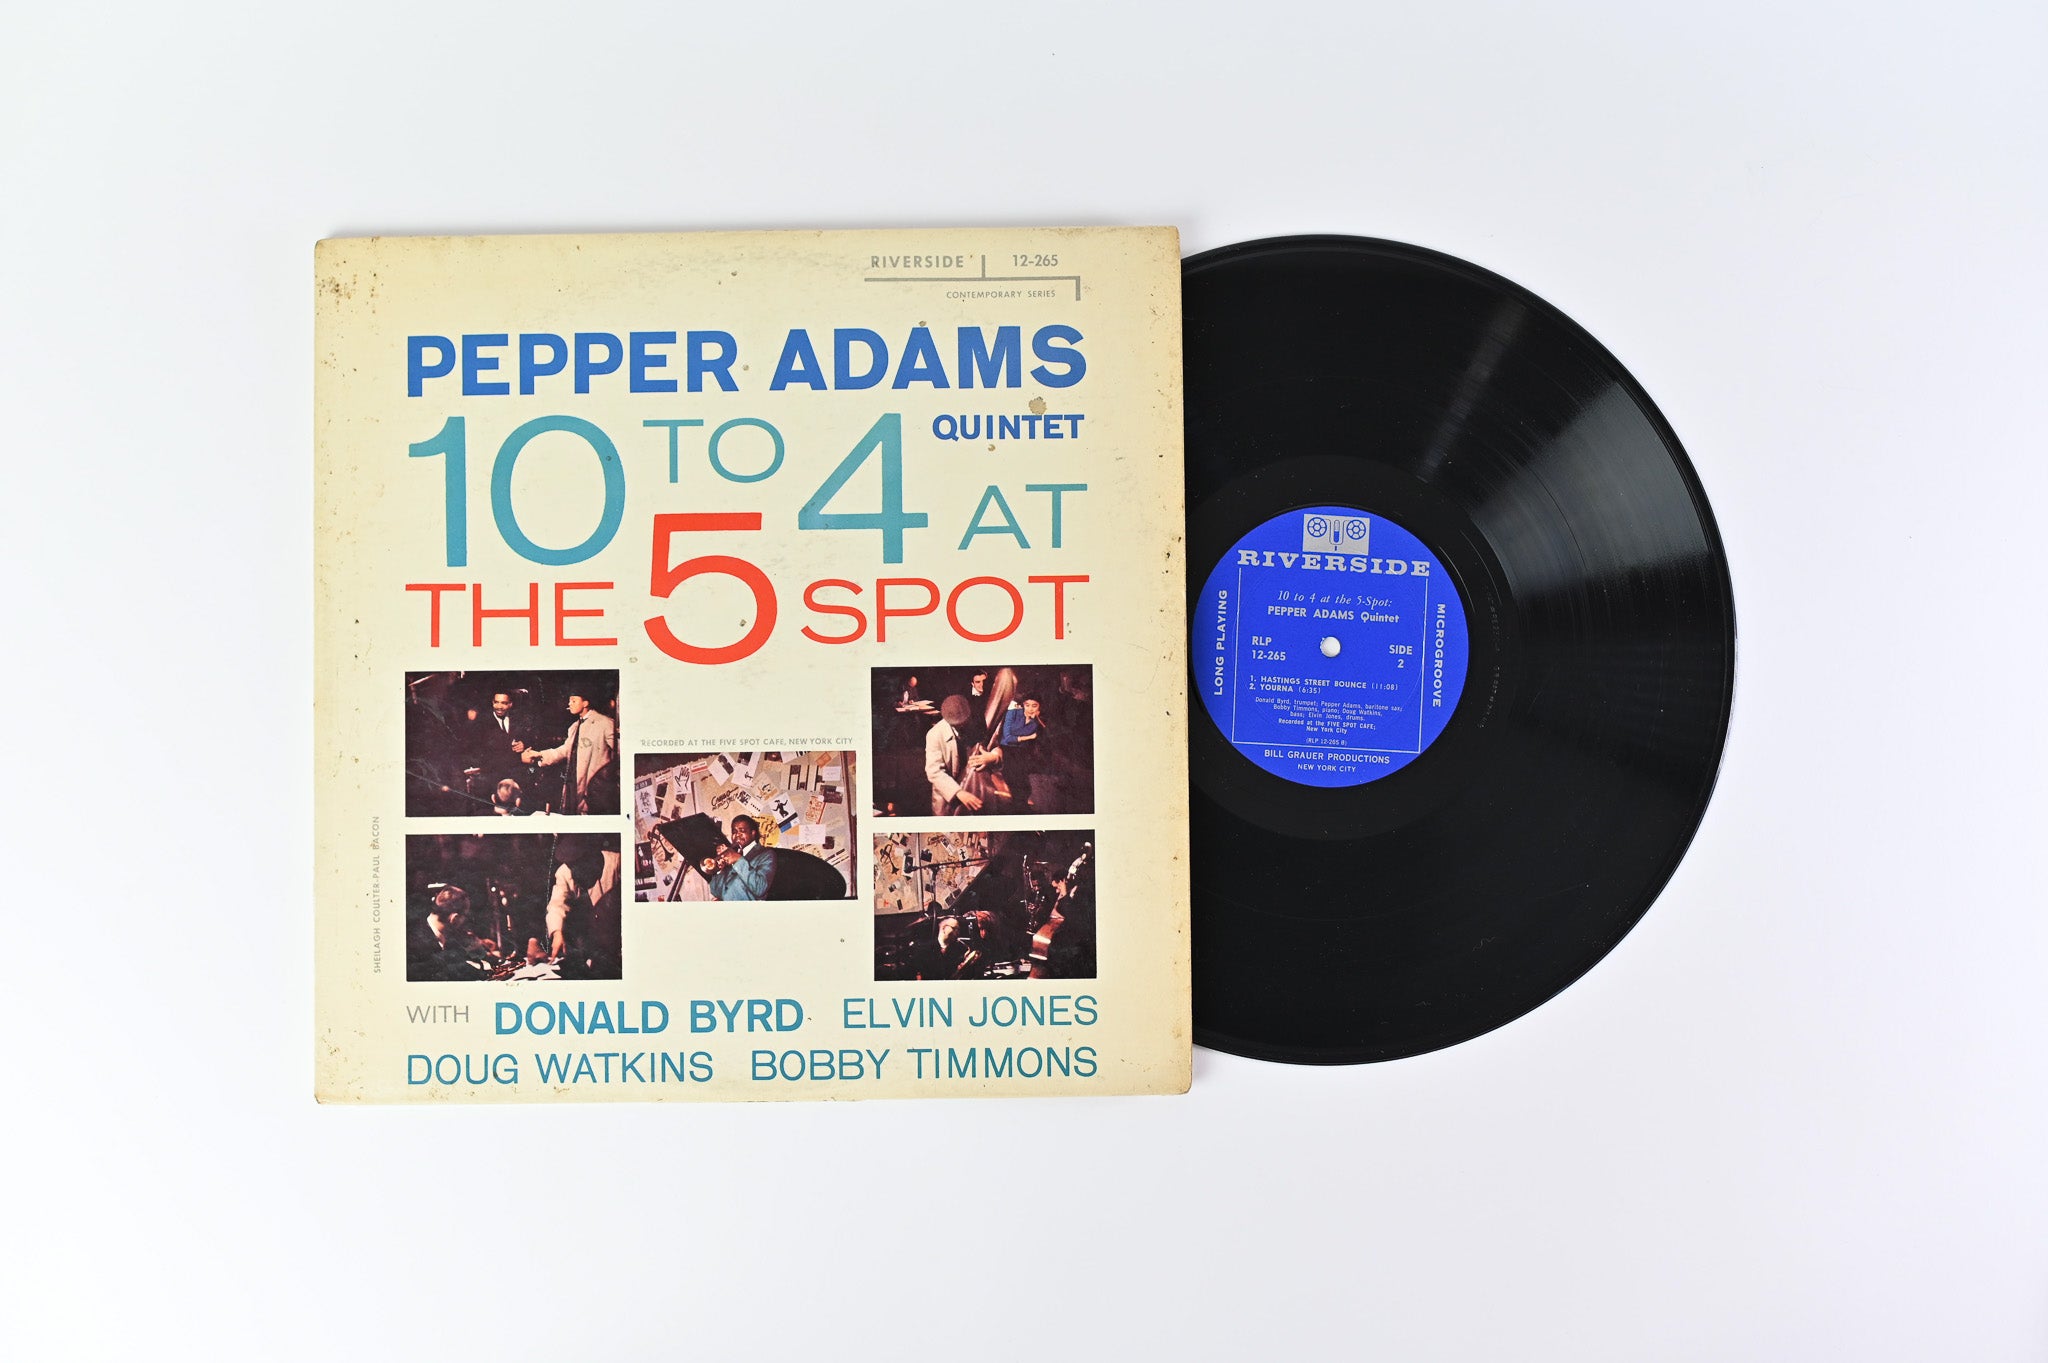 Pepper Adams Quintet - 10 To 4 At The 5-Spot on Riverside Mono Deep Groove